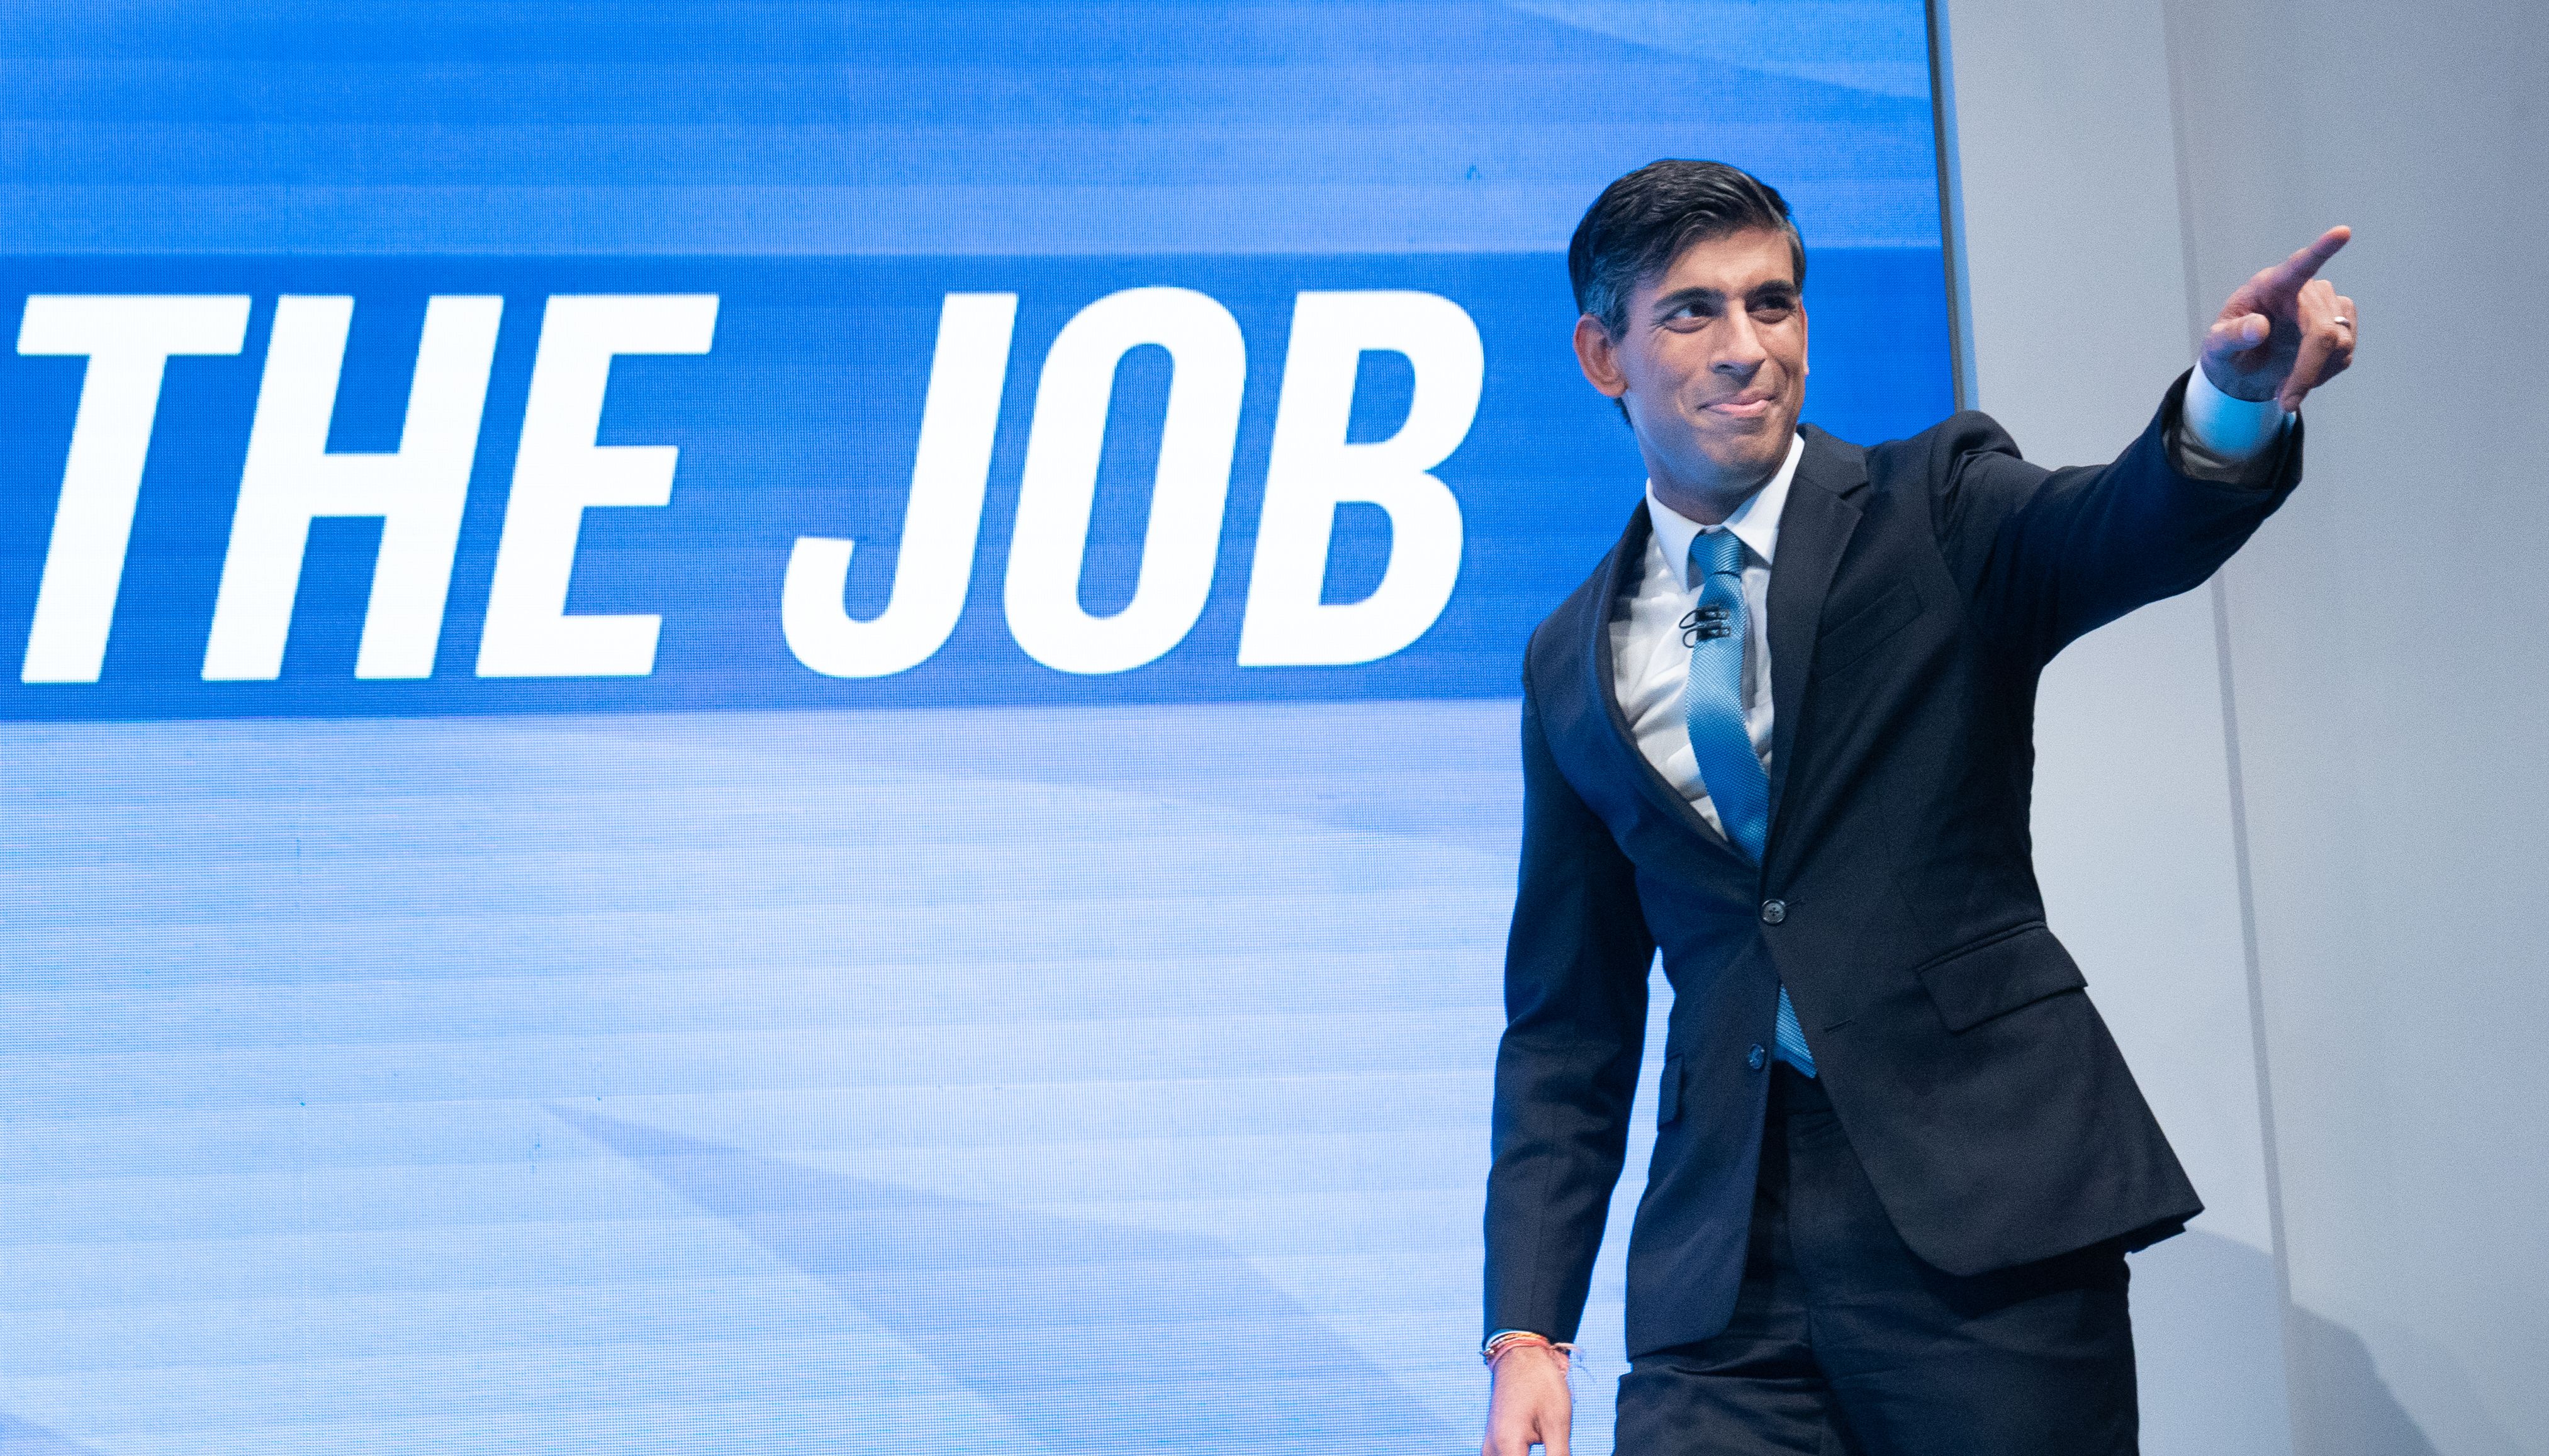 Rishi Sunak arriving on stage to deliver his keynote speech to the Conservative Party Conference in Manchester.